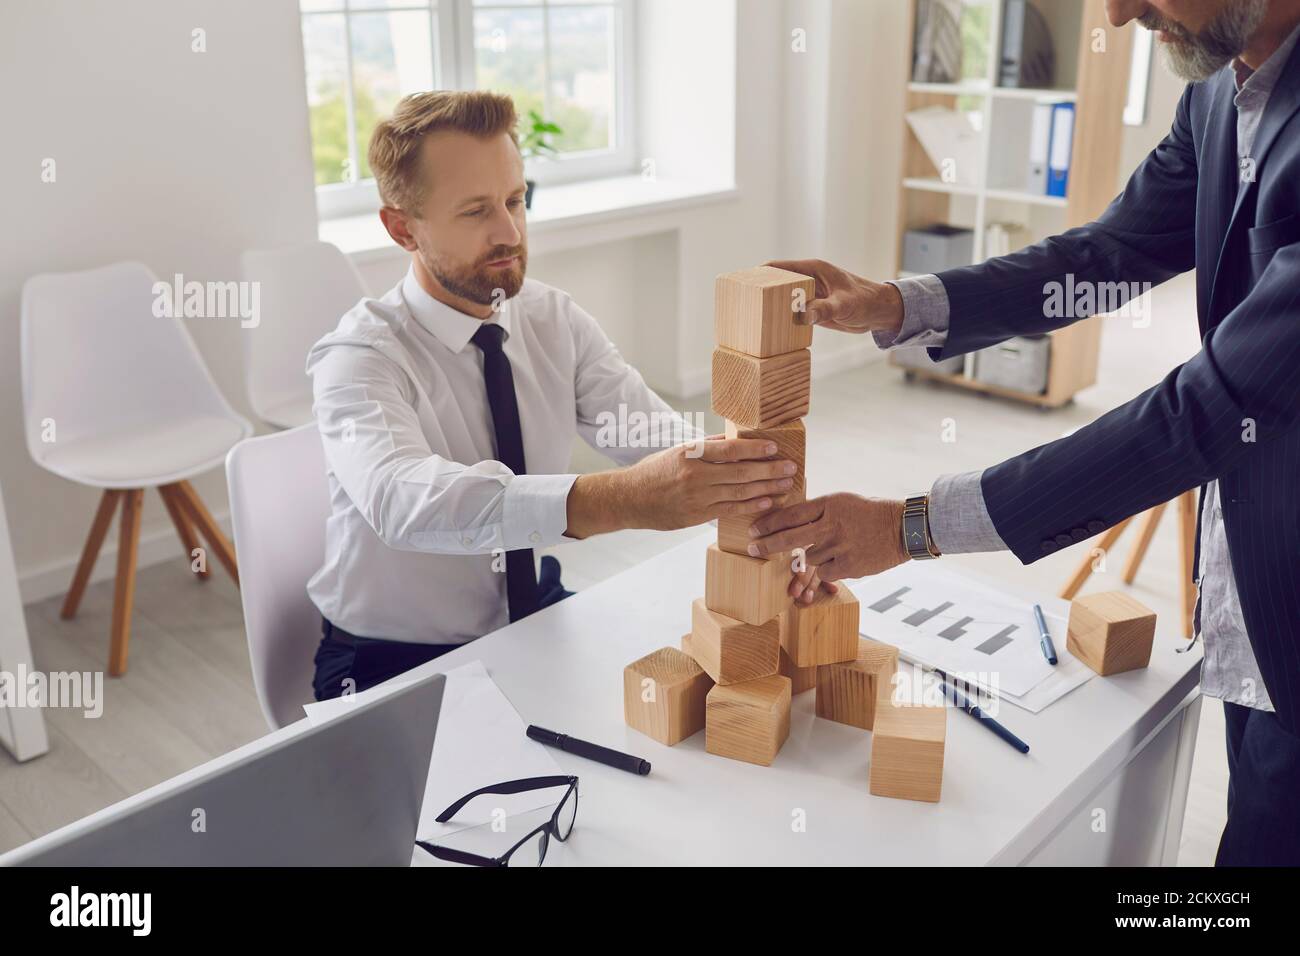 Entrepreneurs of different generations building tower together as metaphor for business succession Stock Photo